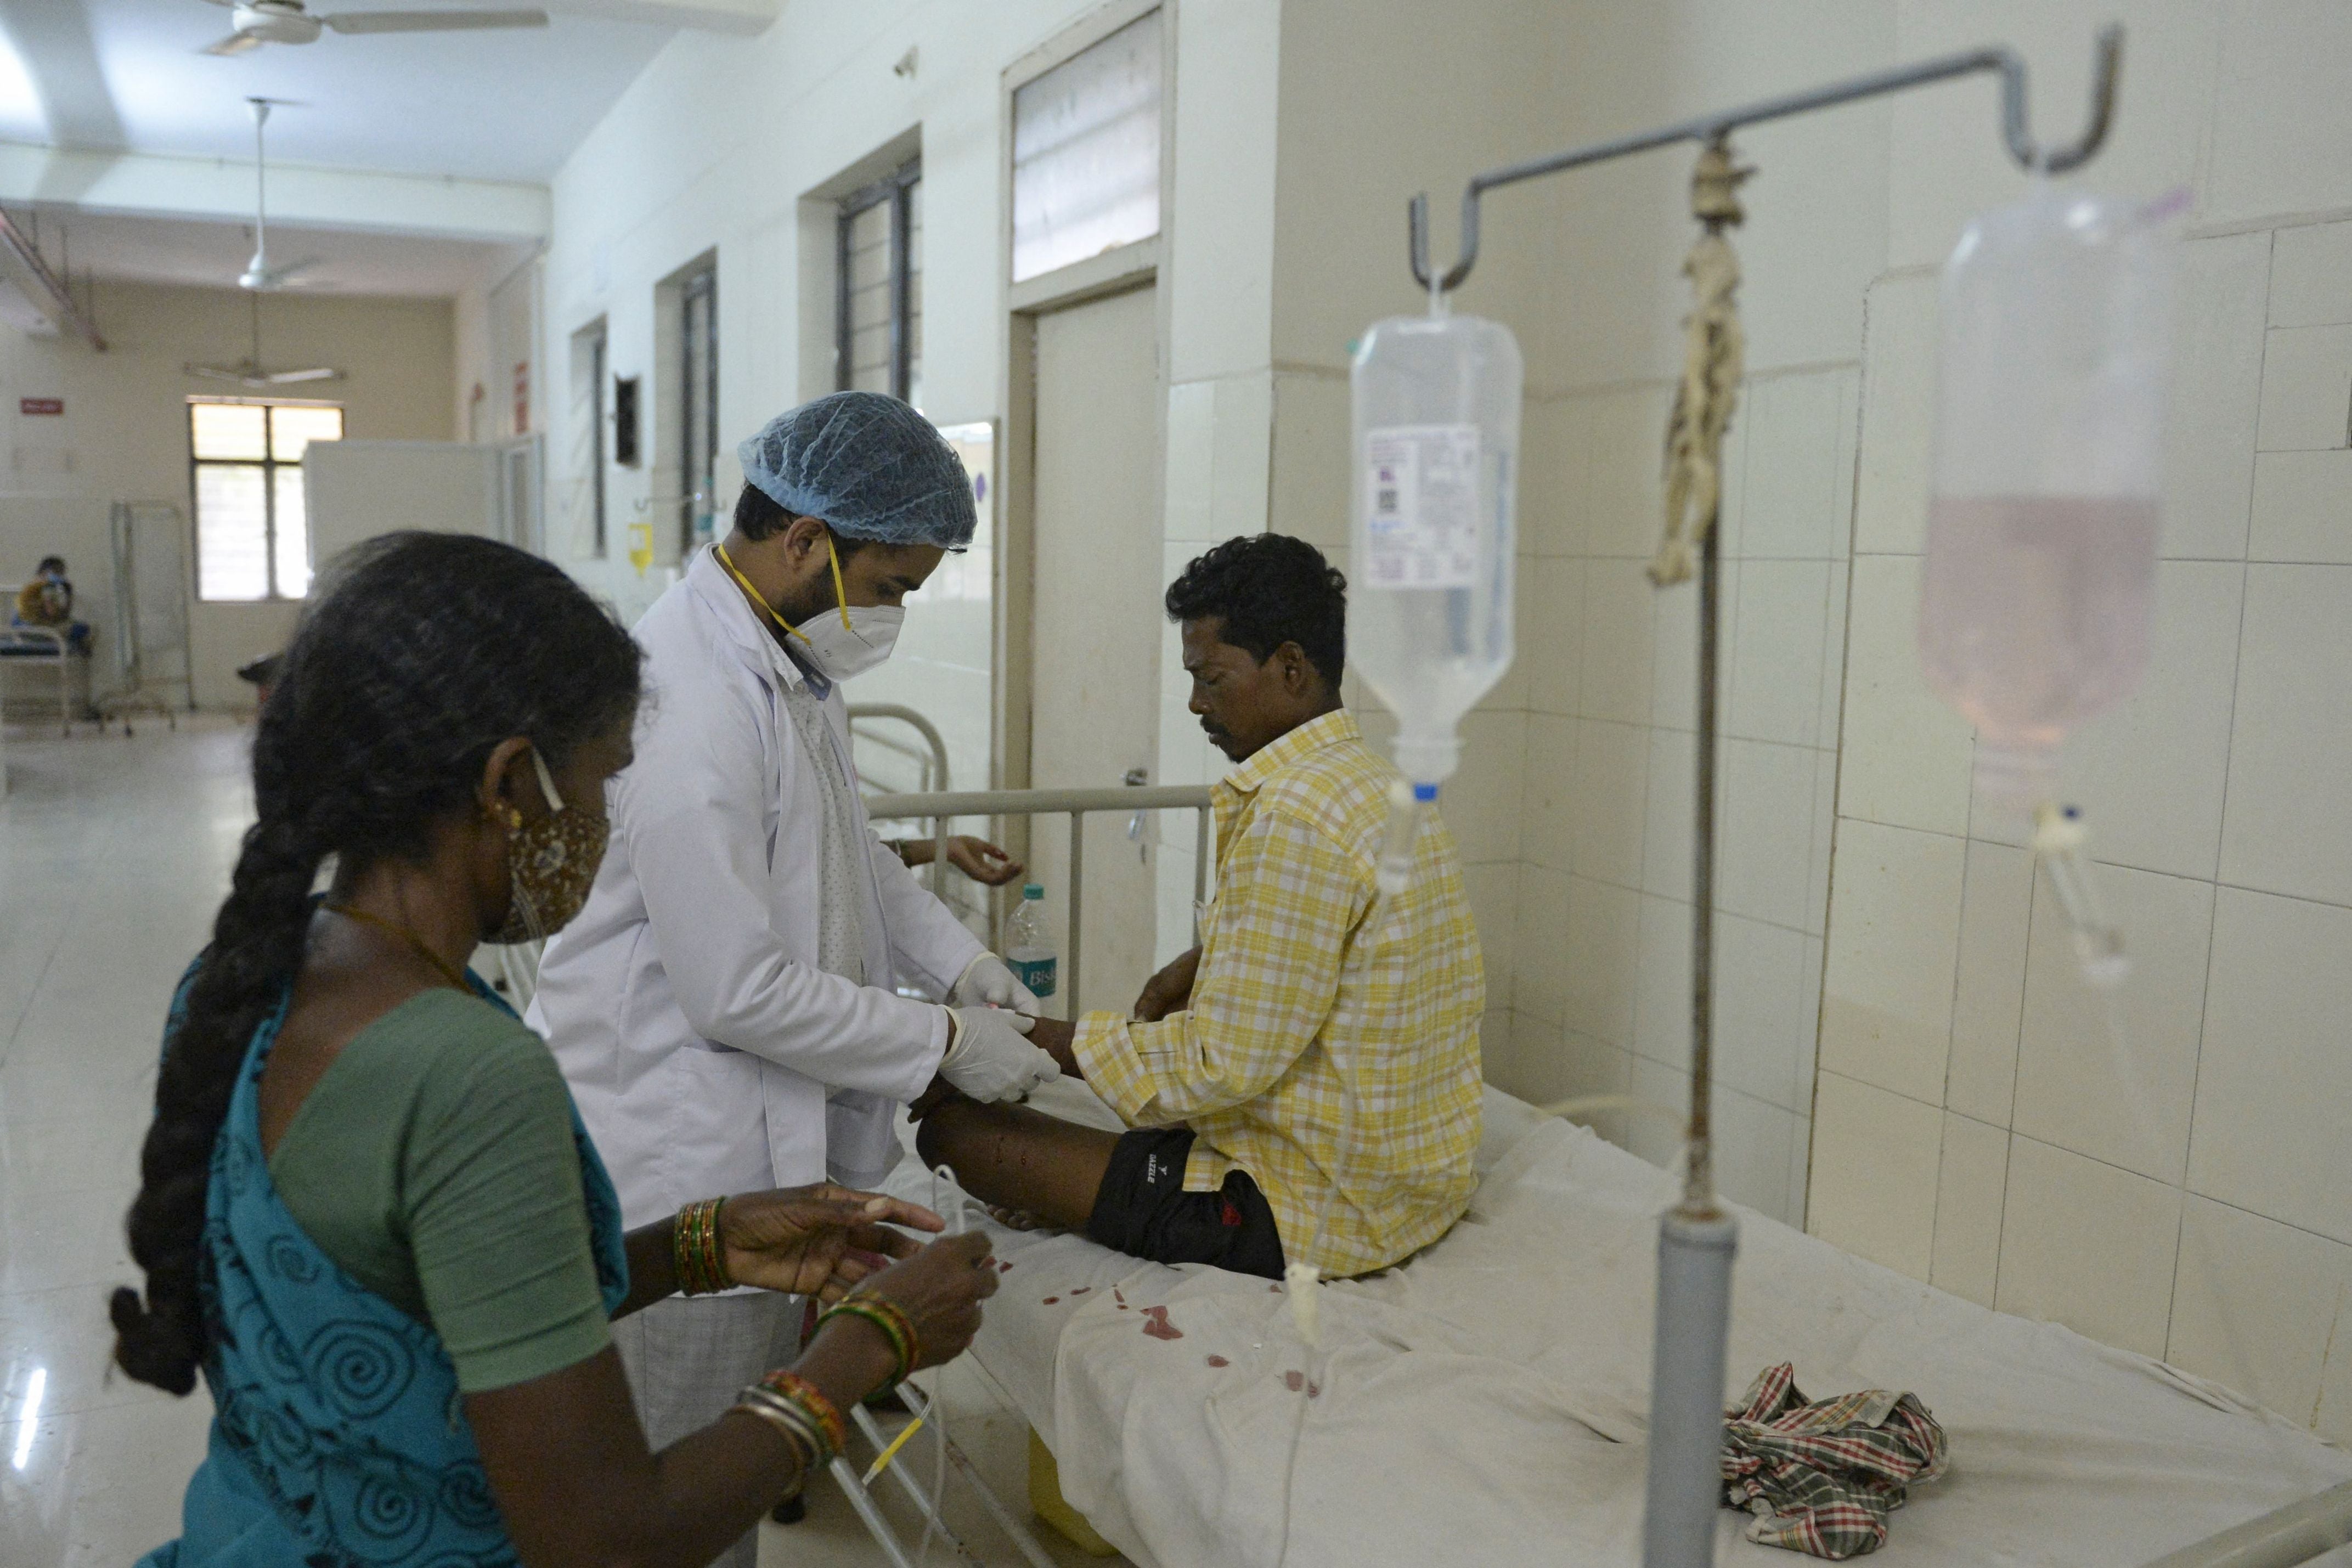 A doctor examines a patient who recovered from Covid-19 and is now infected with black fungus at a hospital in Hyderabad on 21 May, 2021